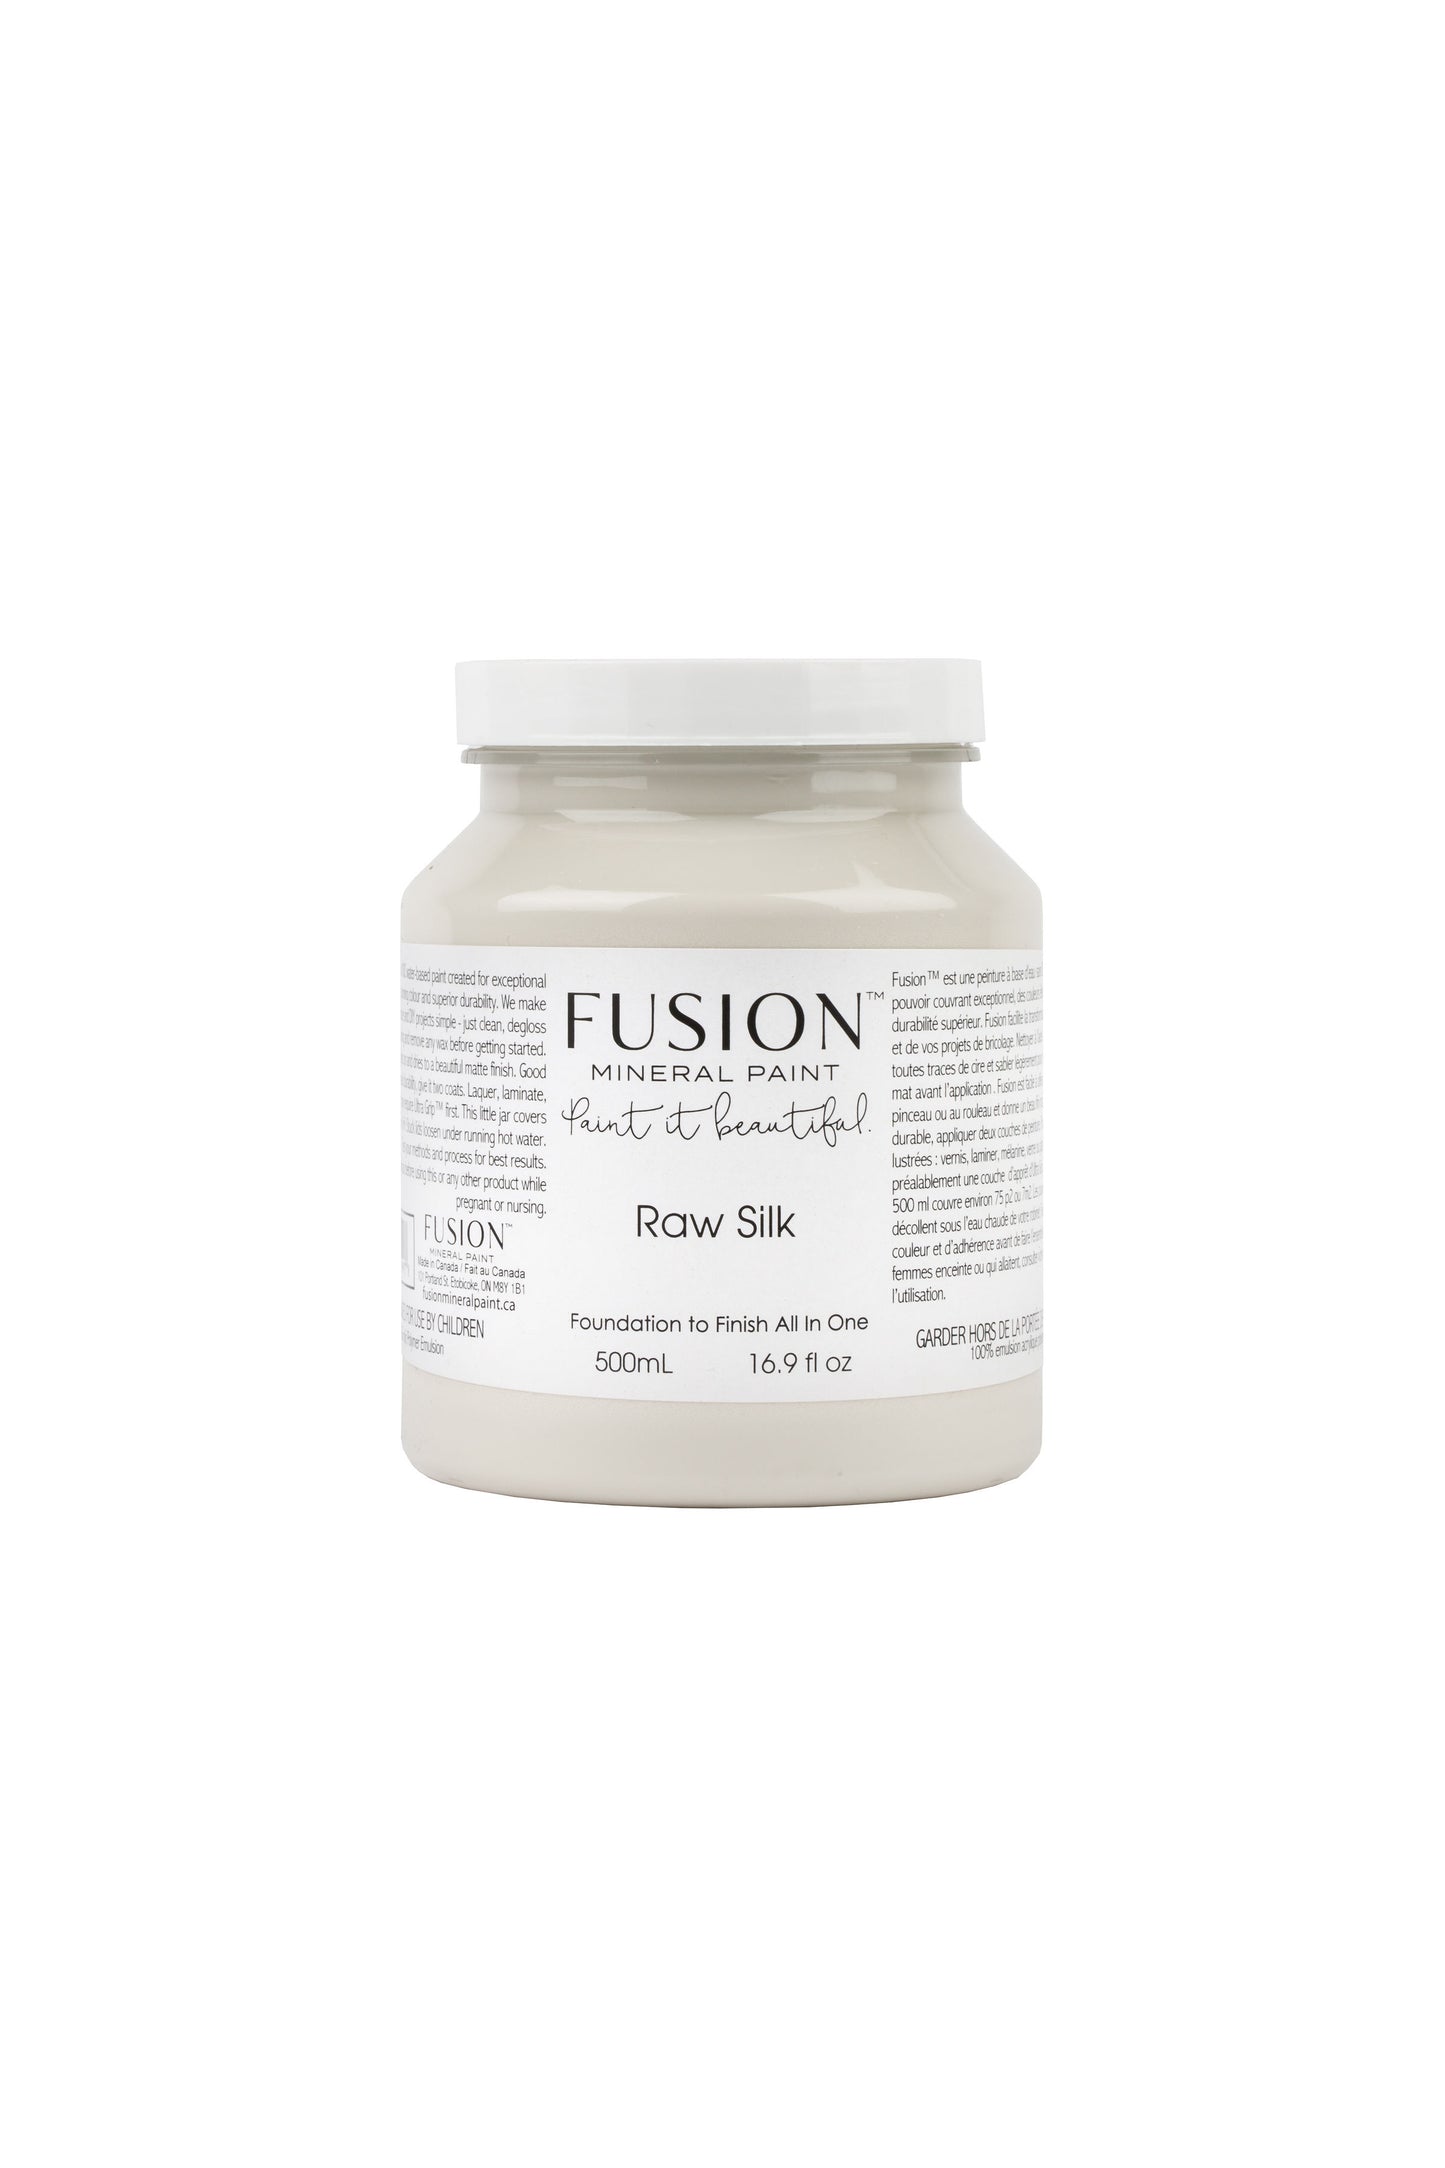 Raw Silk Fusion Mineral Paint, Warm White Paint Color| 500ml Pint Size